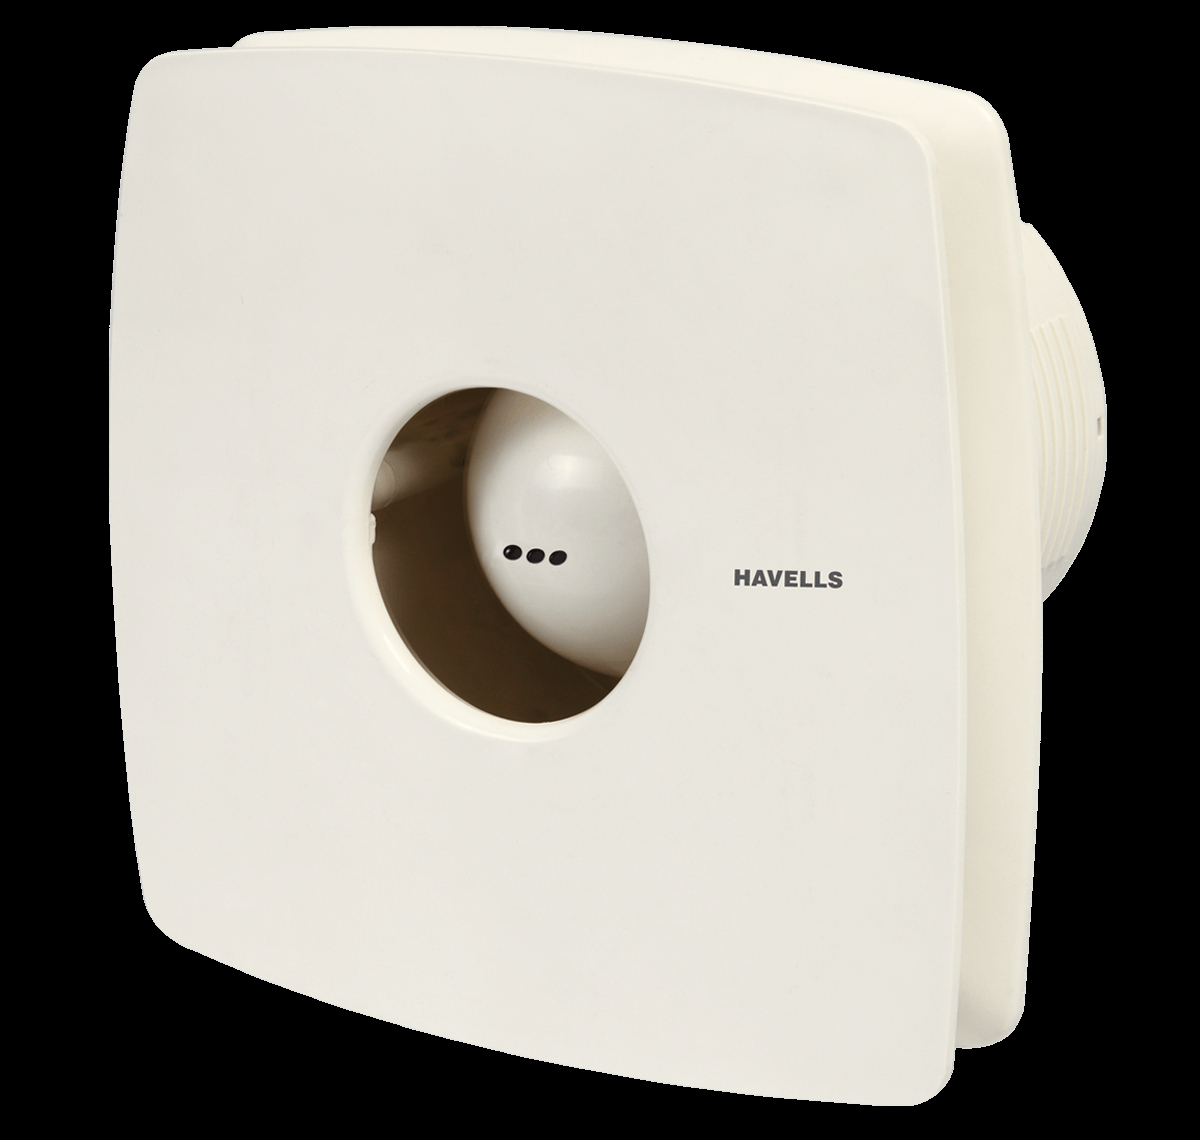 Vento Jet 15 Exhaust Fan Havells with dimensions 1200 X 1140